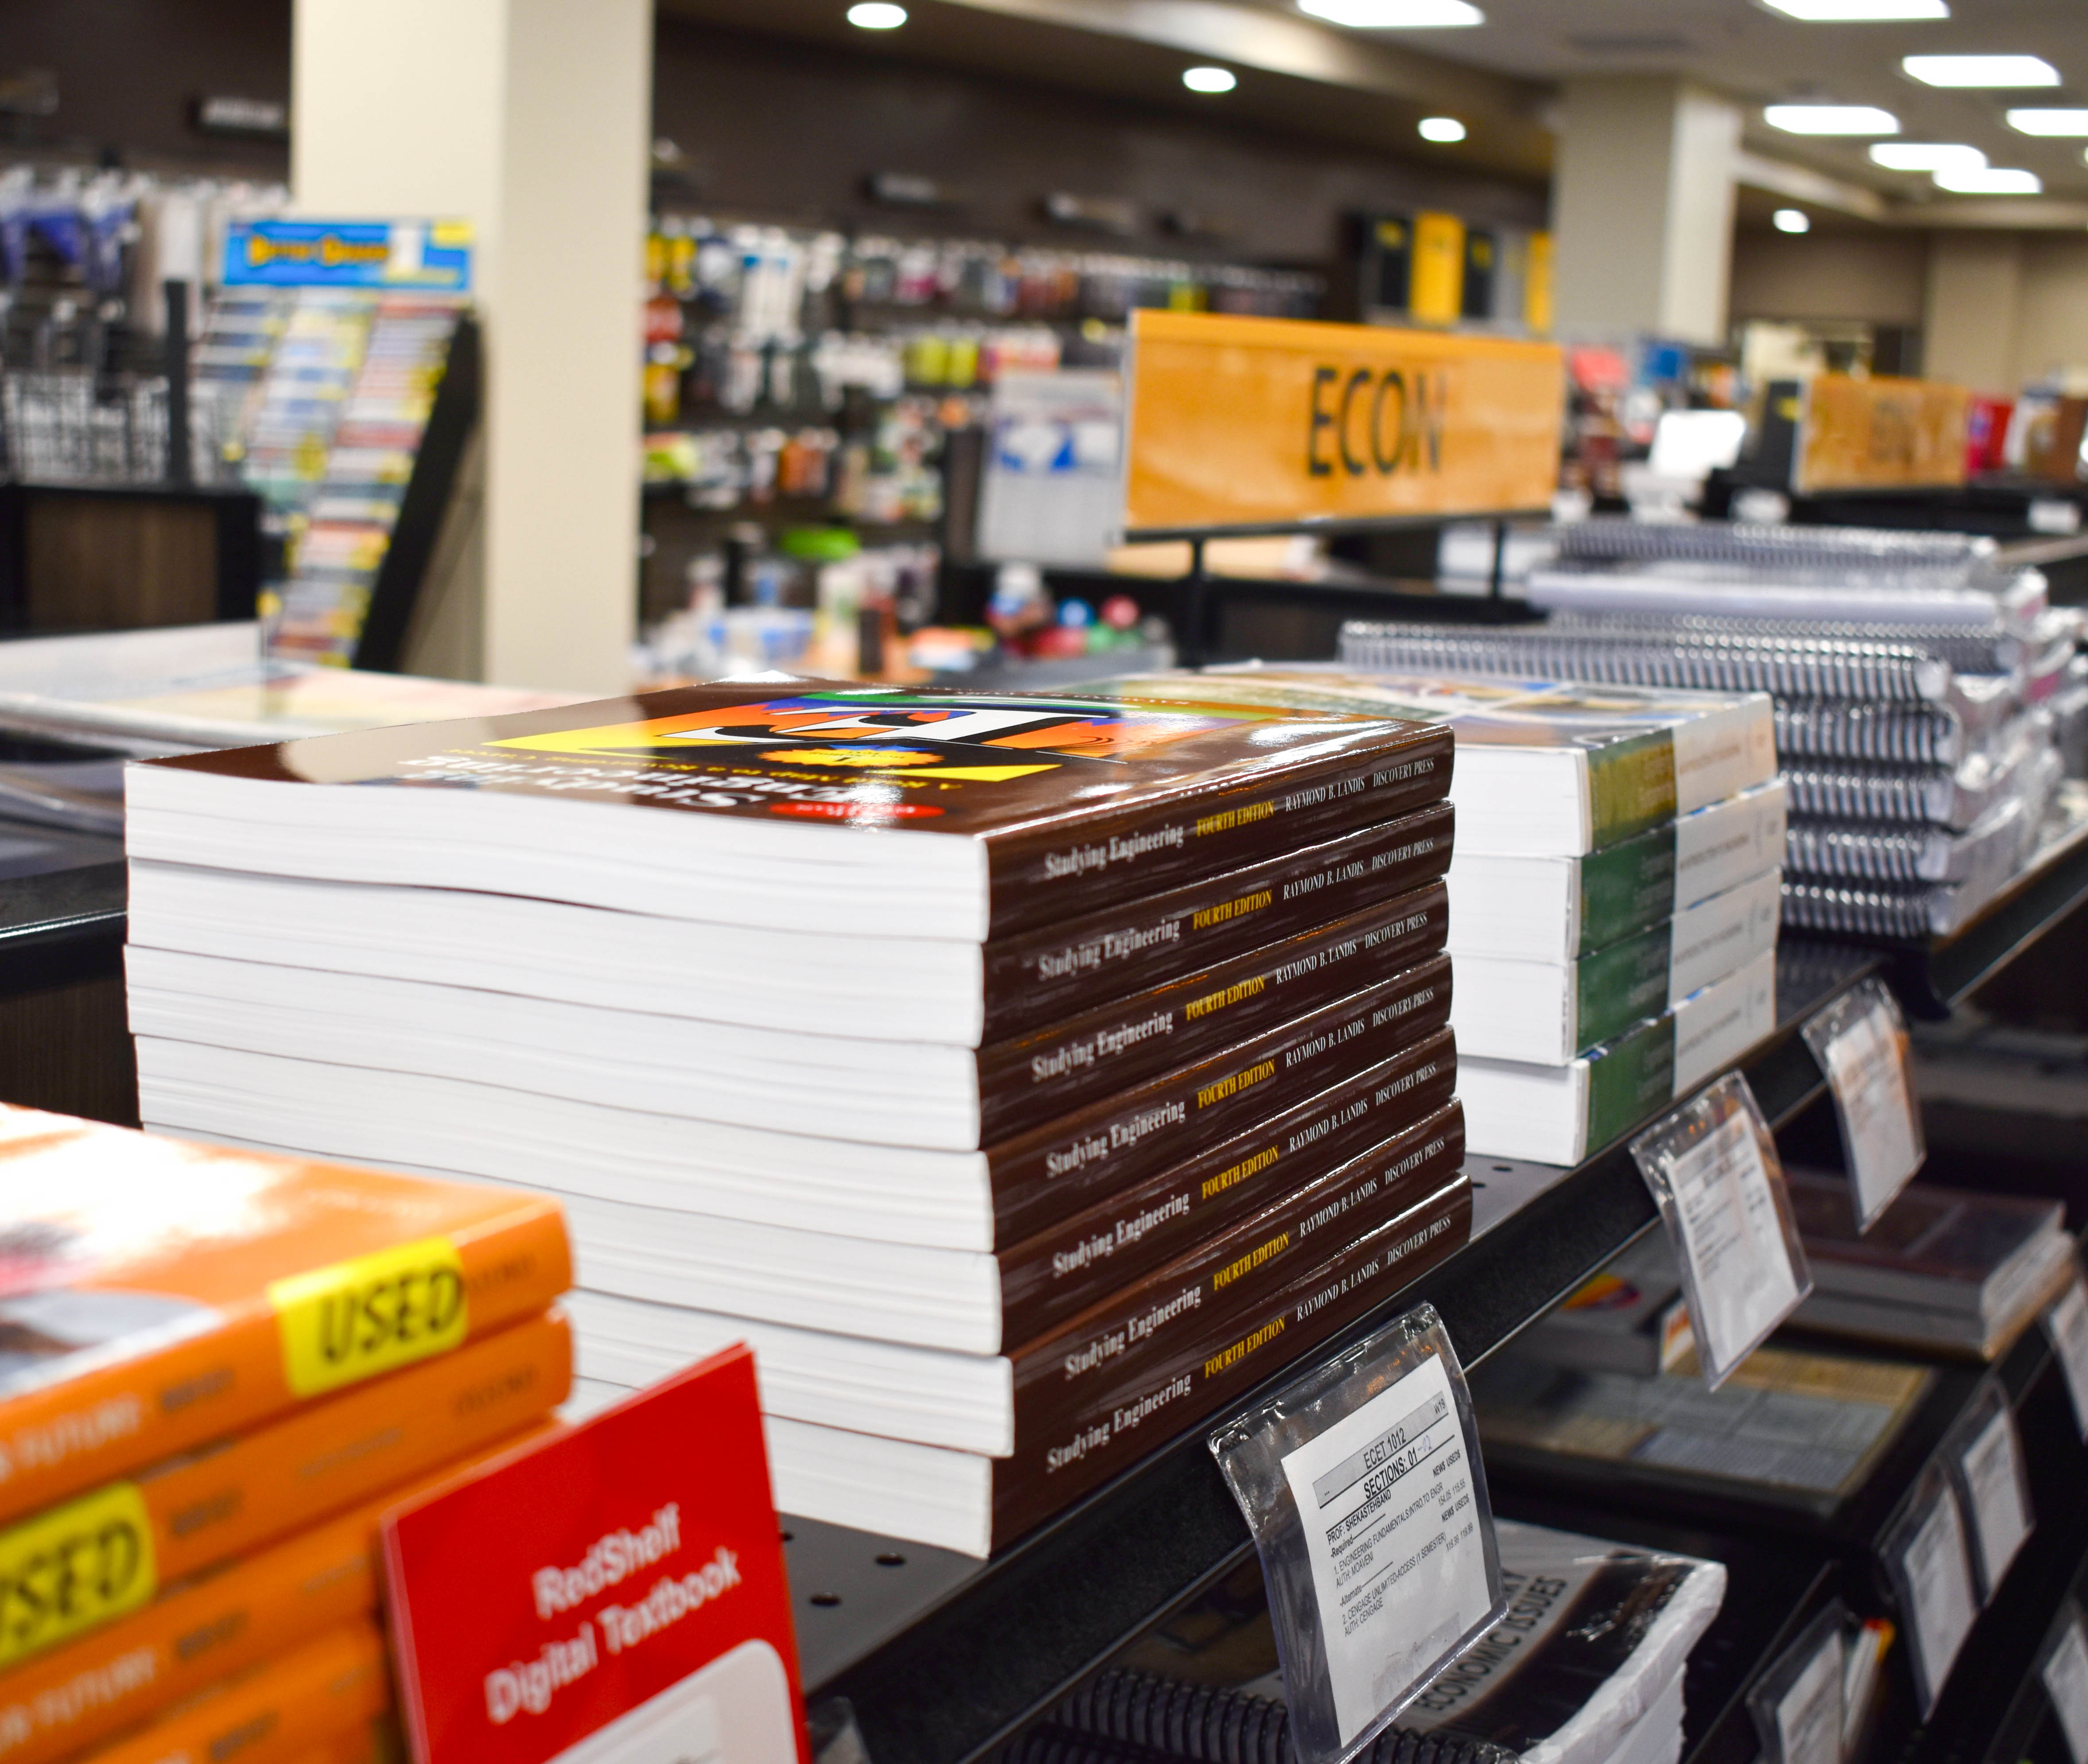 OPINION: New editions of textbooks are a rip-off